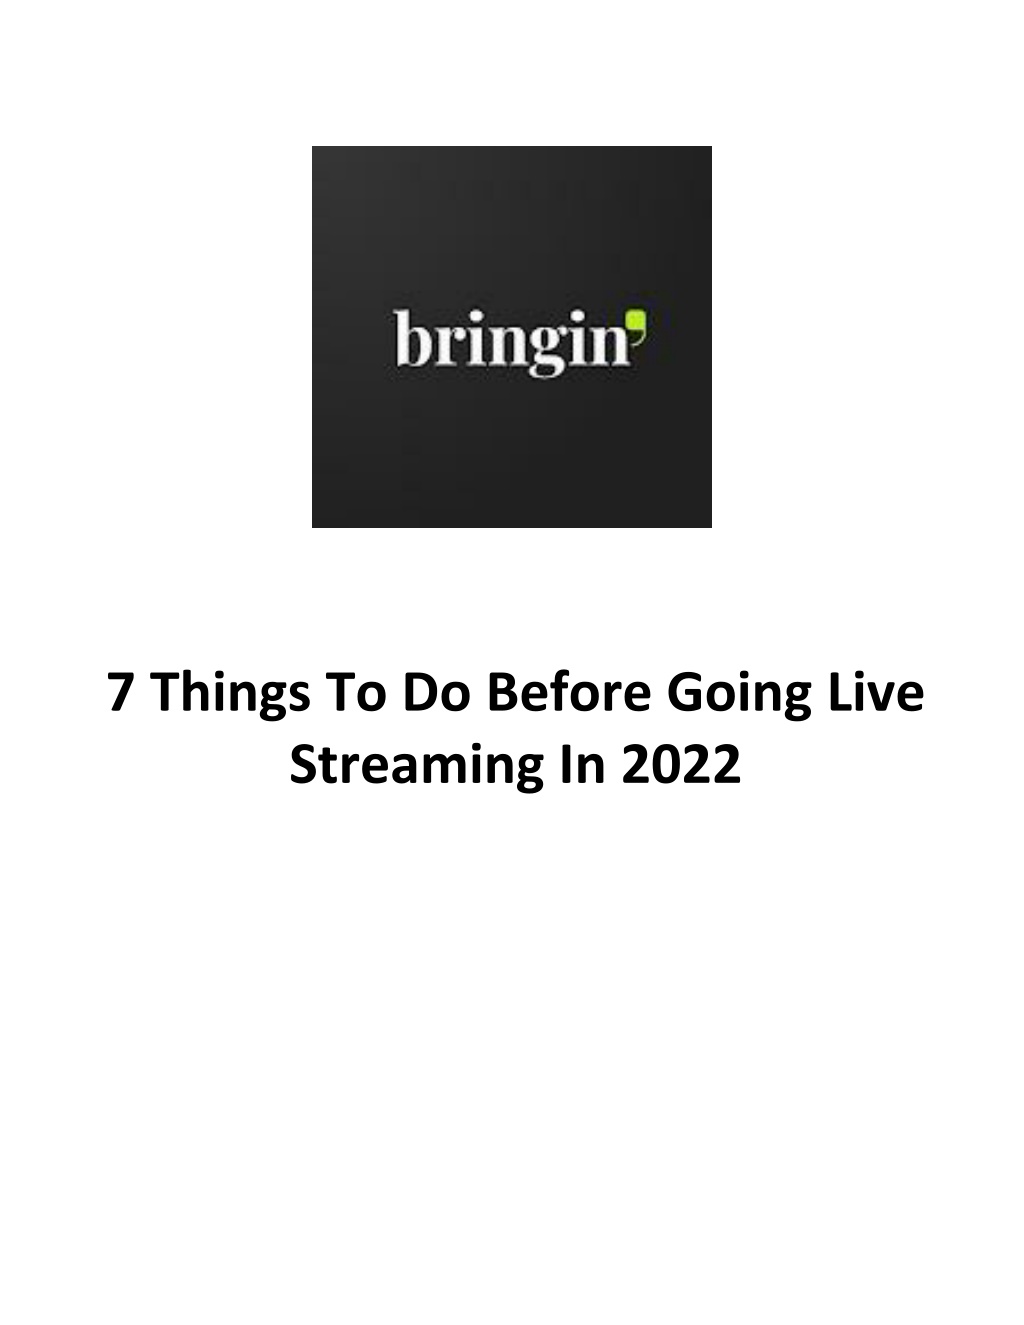 PPT 7 Things To Do Before Going Live Streaming In 2022 PowerPoint